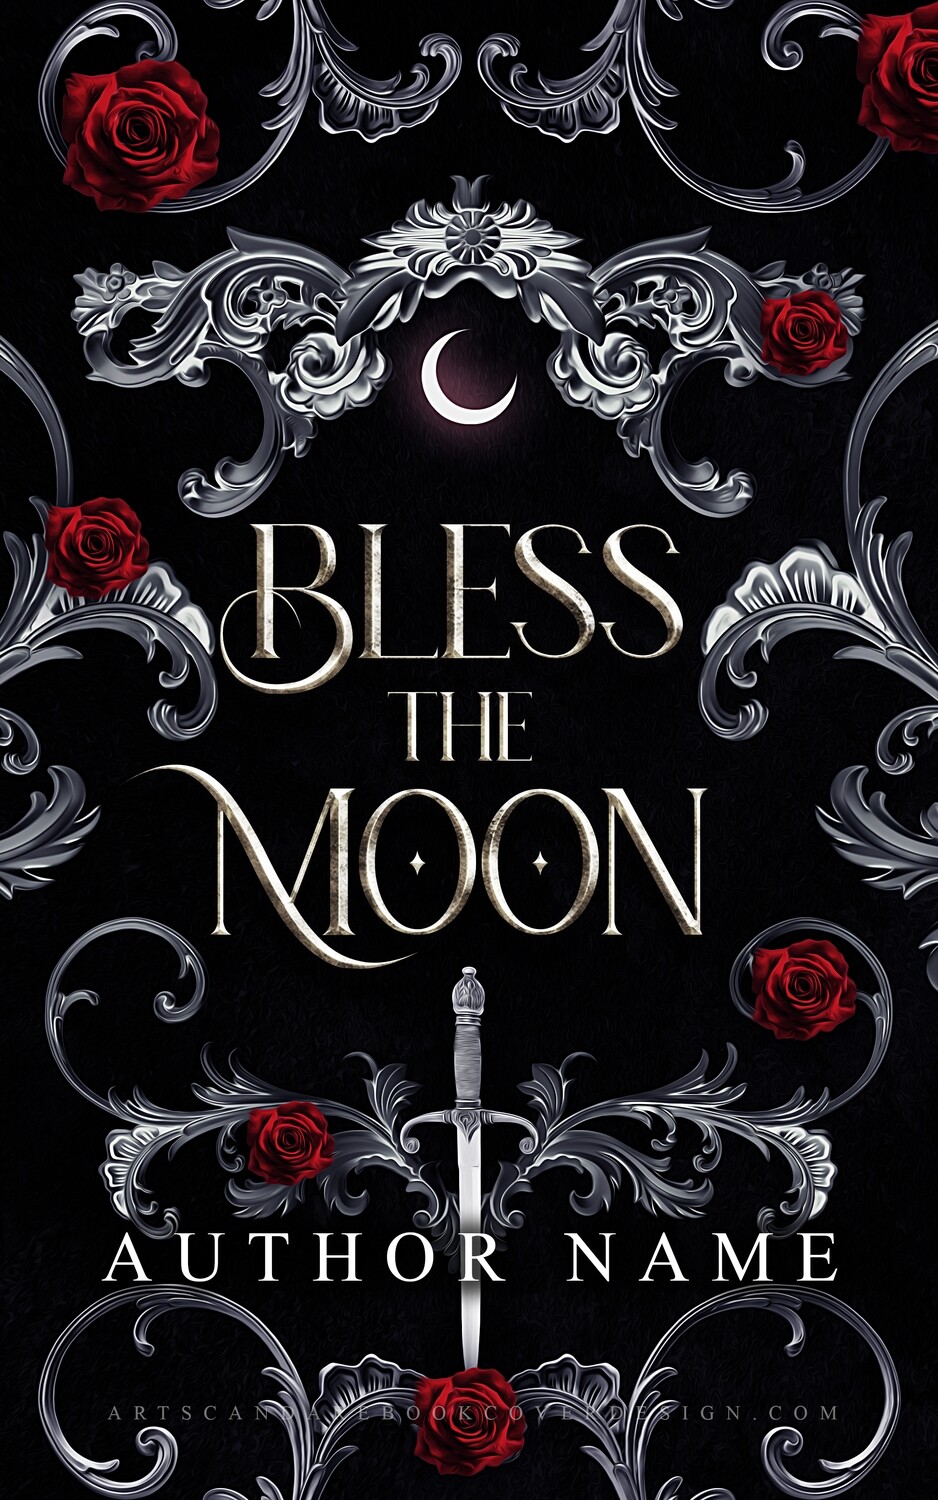 BLESS THE MOON